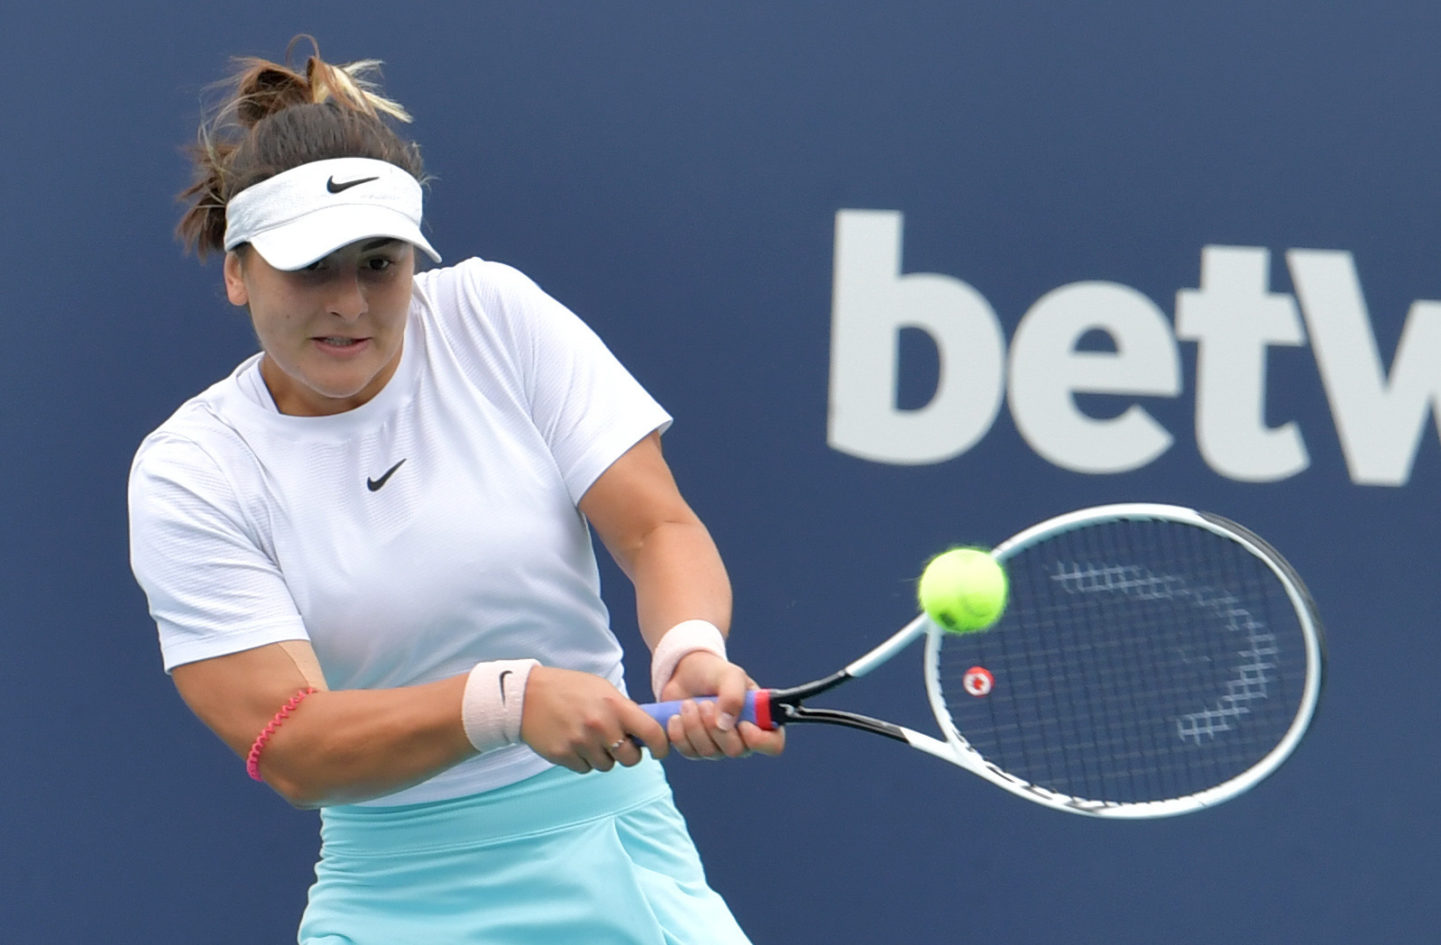 Andreescu falls in Wimbledon first round, Shapovalov gets free pass